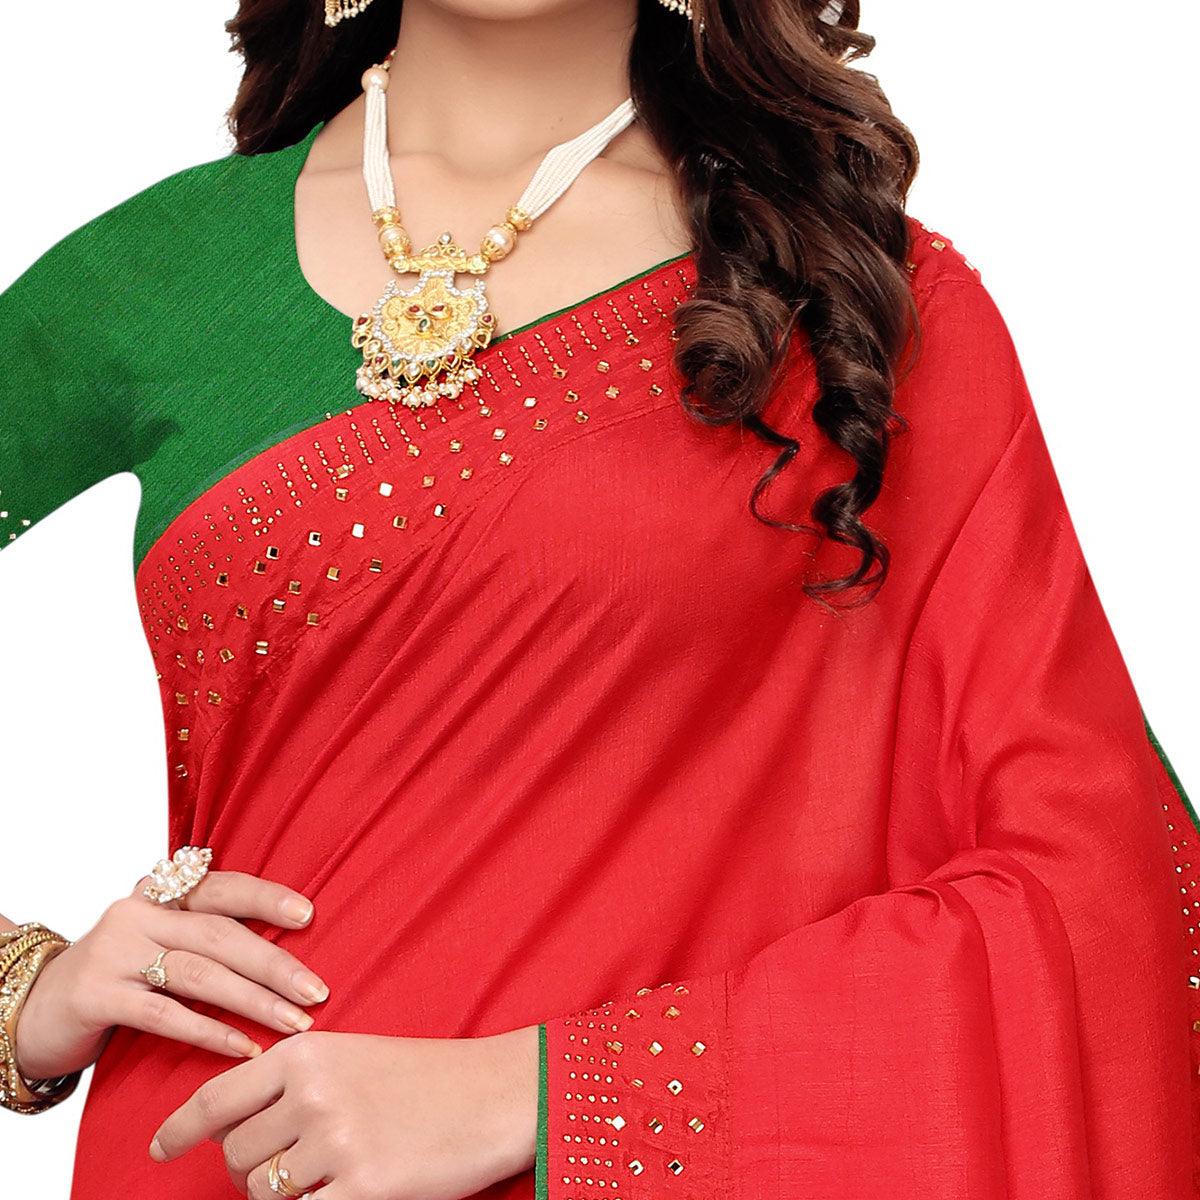 Charming Red Colored Partywear Art Silk Saree - Peachmode